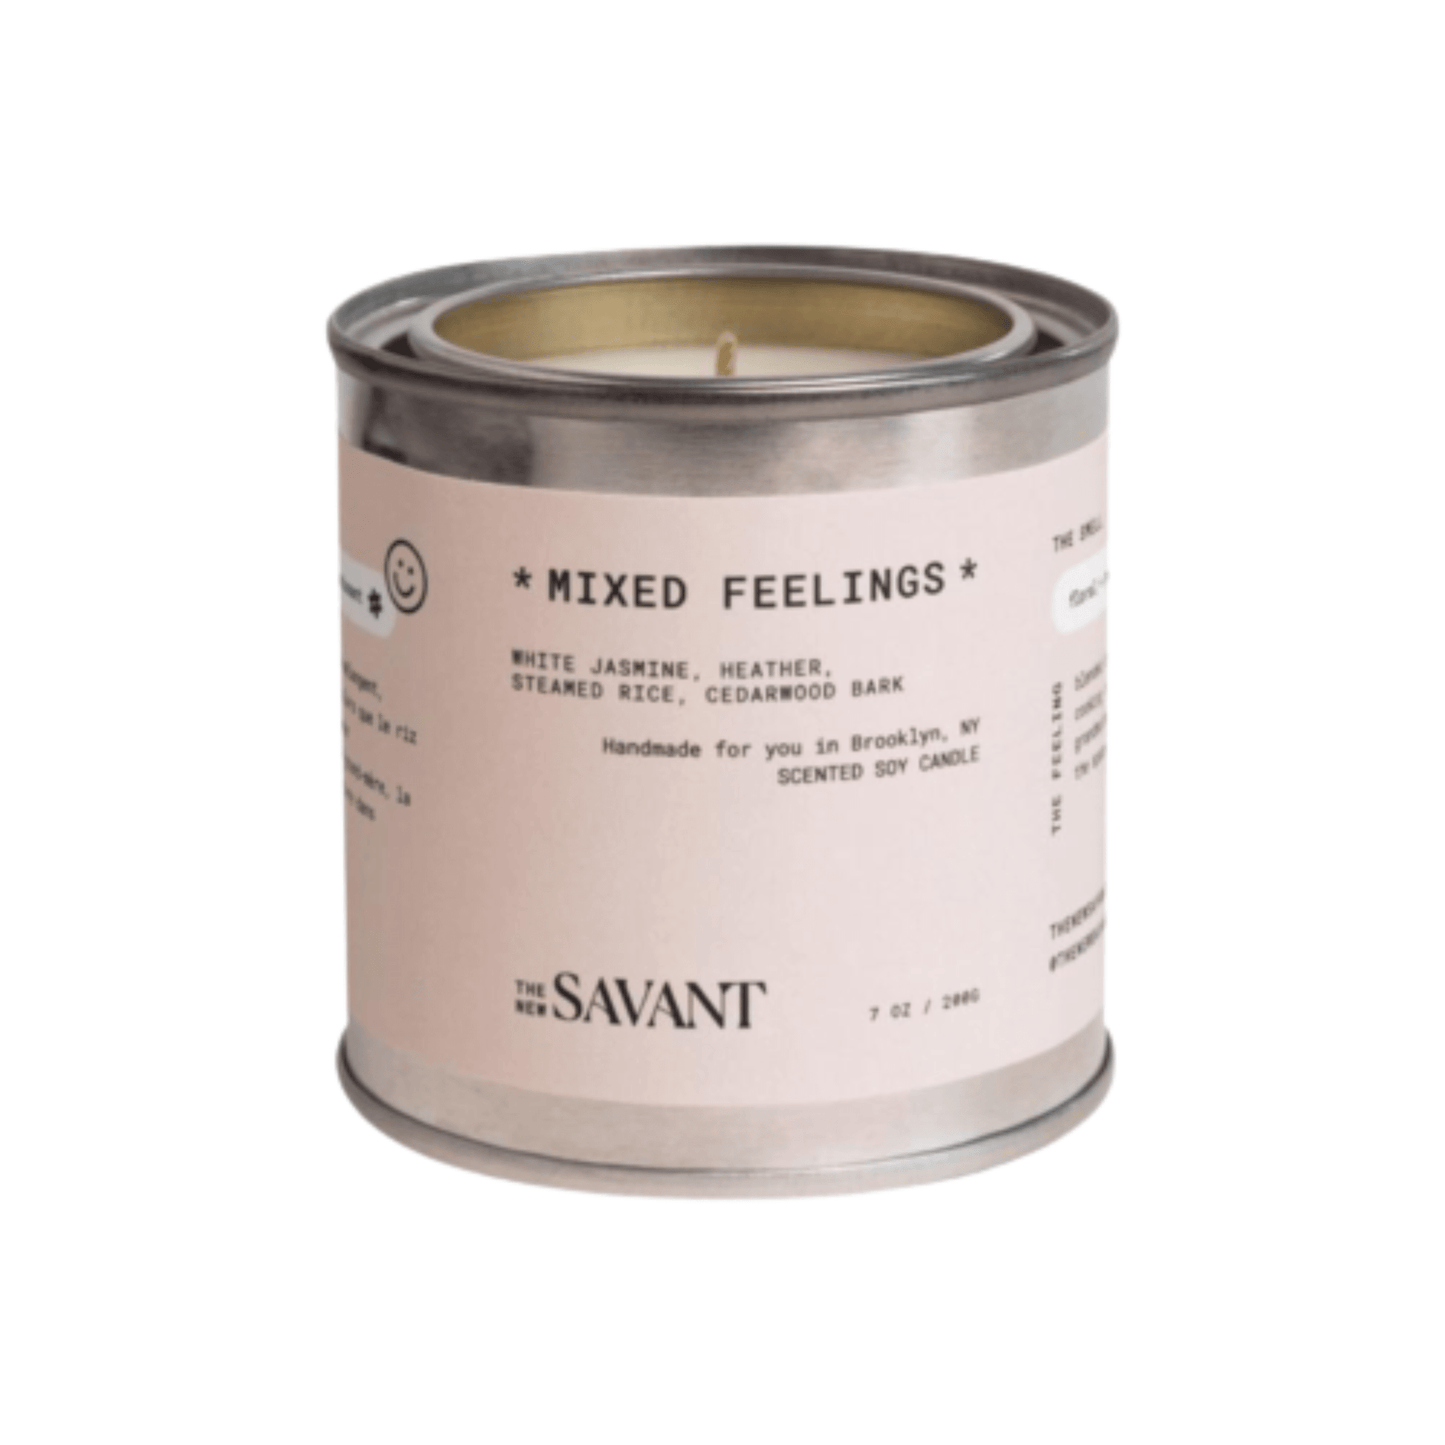 Primary Image of Mixed Feelings Candle